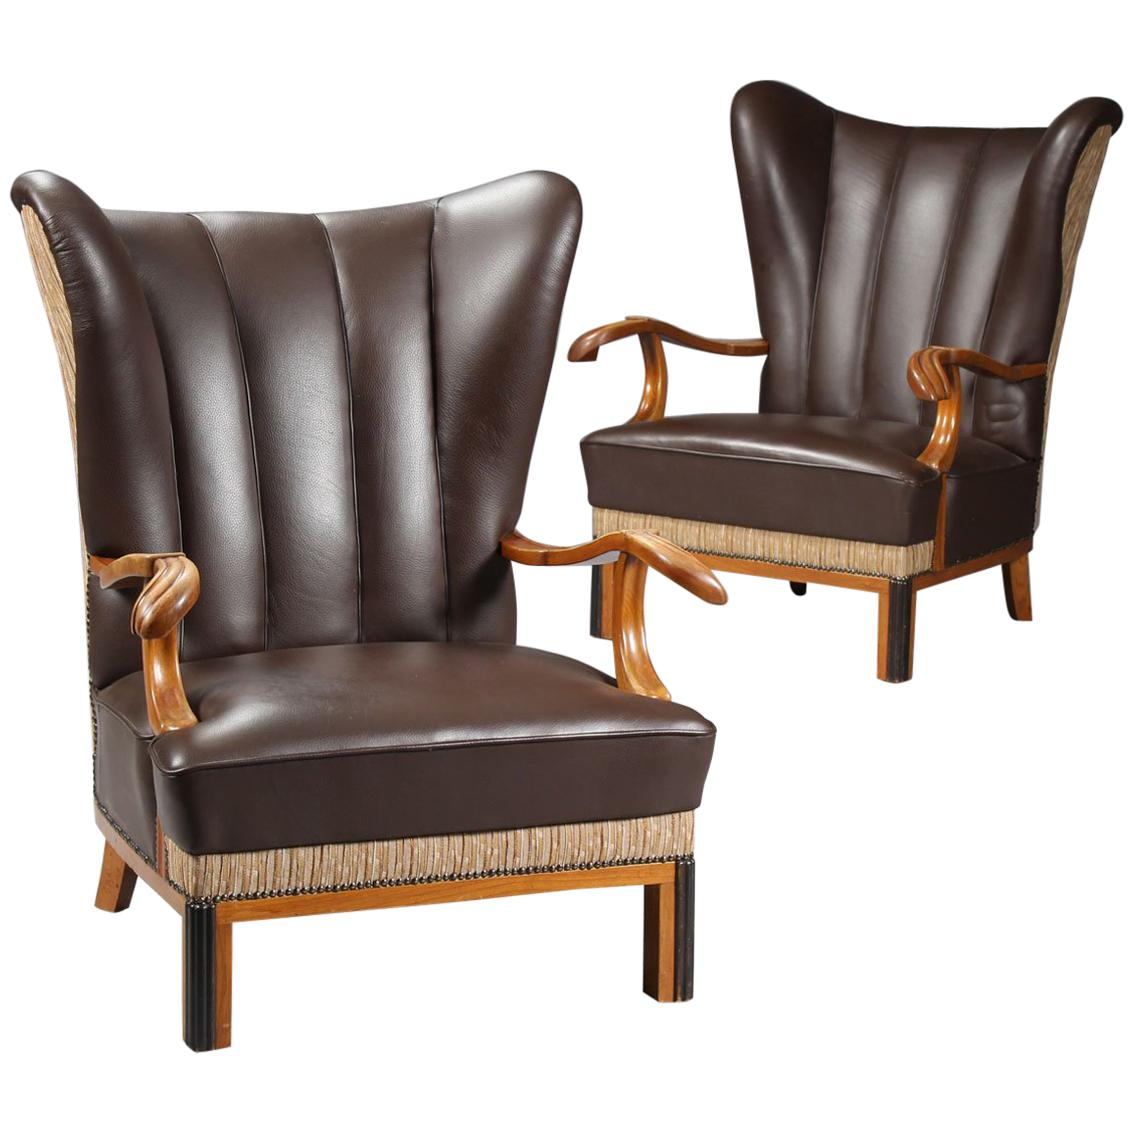 Pair of Large Danish 1940s Wingback Chairs with Leather Upholstery